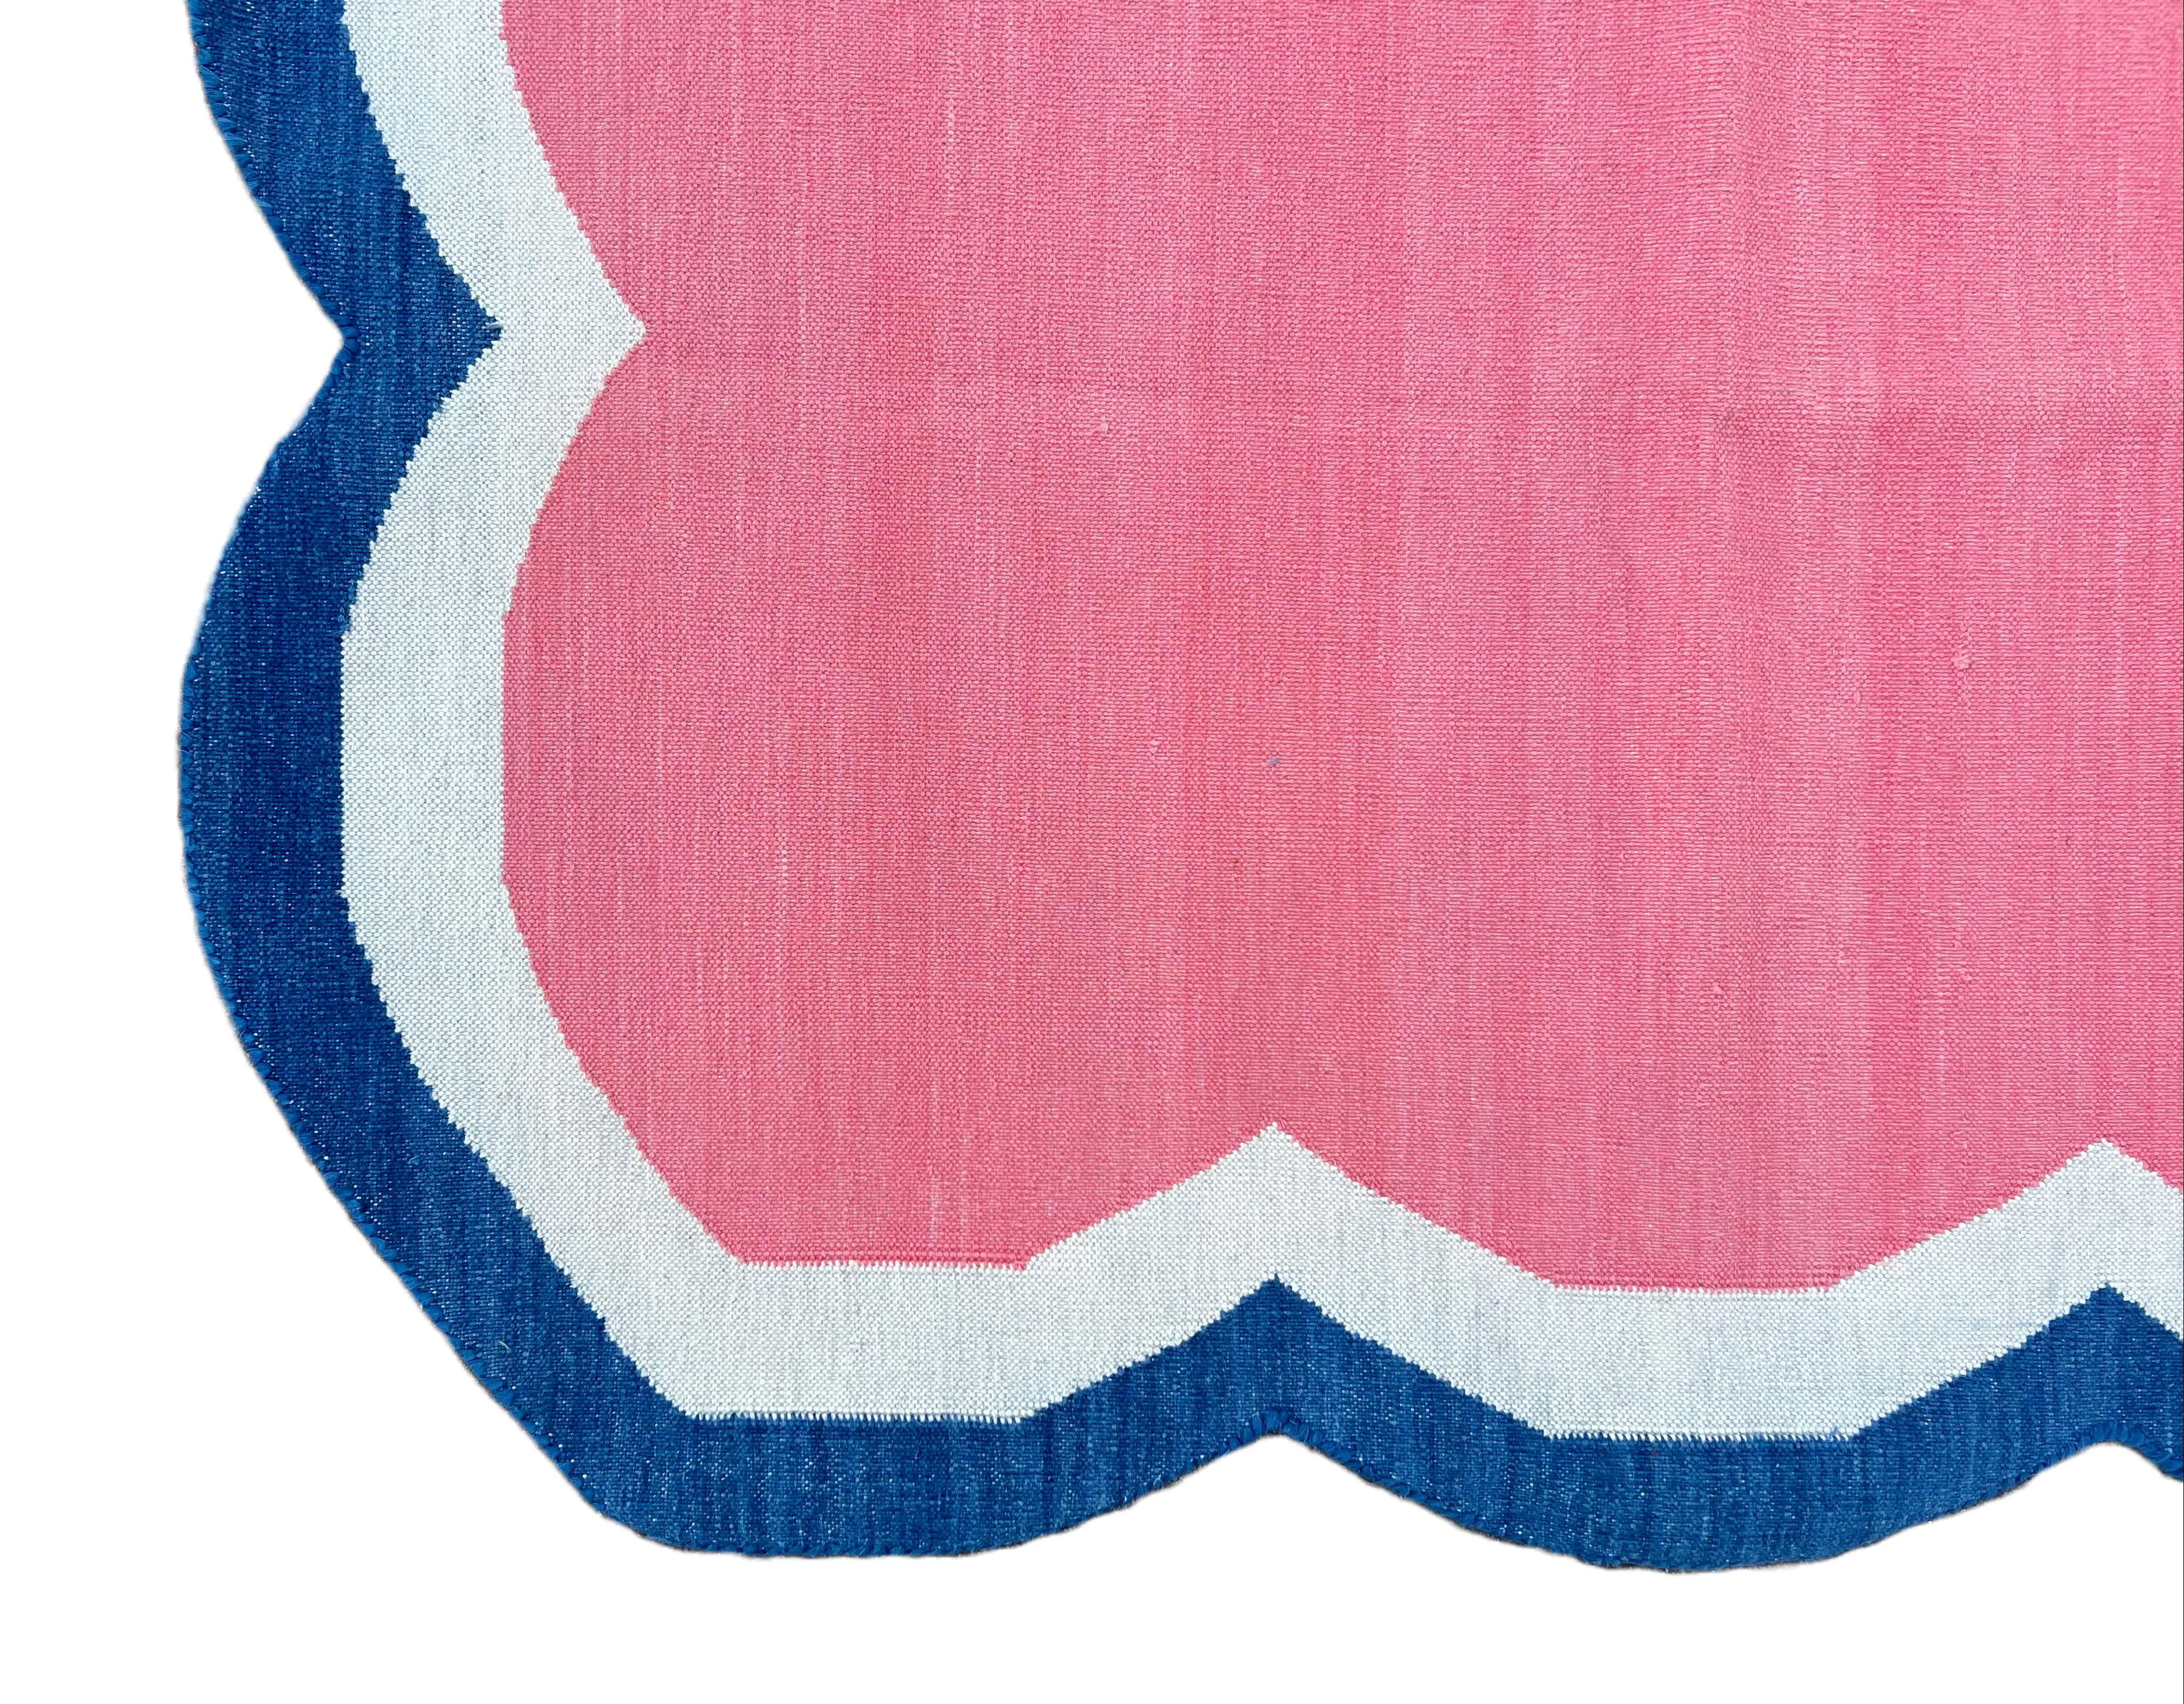 Handmade Cotton Area Flat Weave Rug, 3x5 Pink And Blue Scalloped Kilim Dhurrie In New Condition For Sale In Jaipur, IN